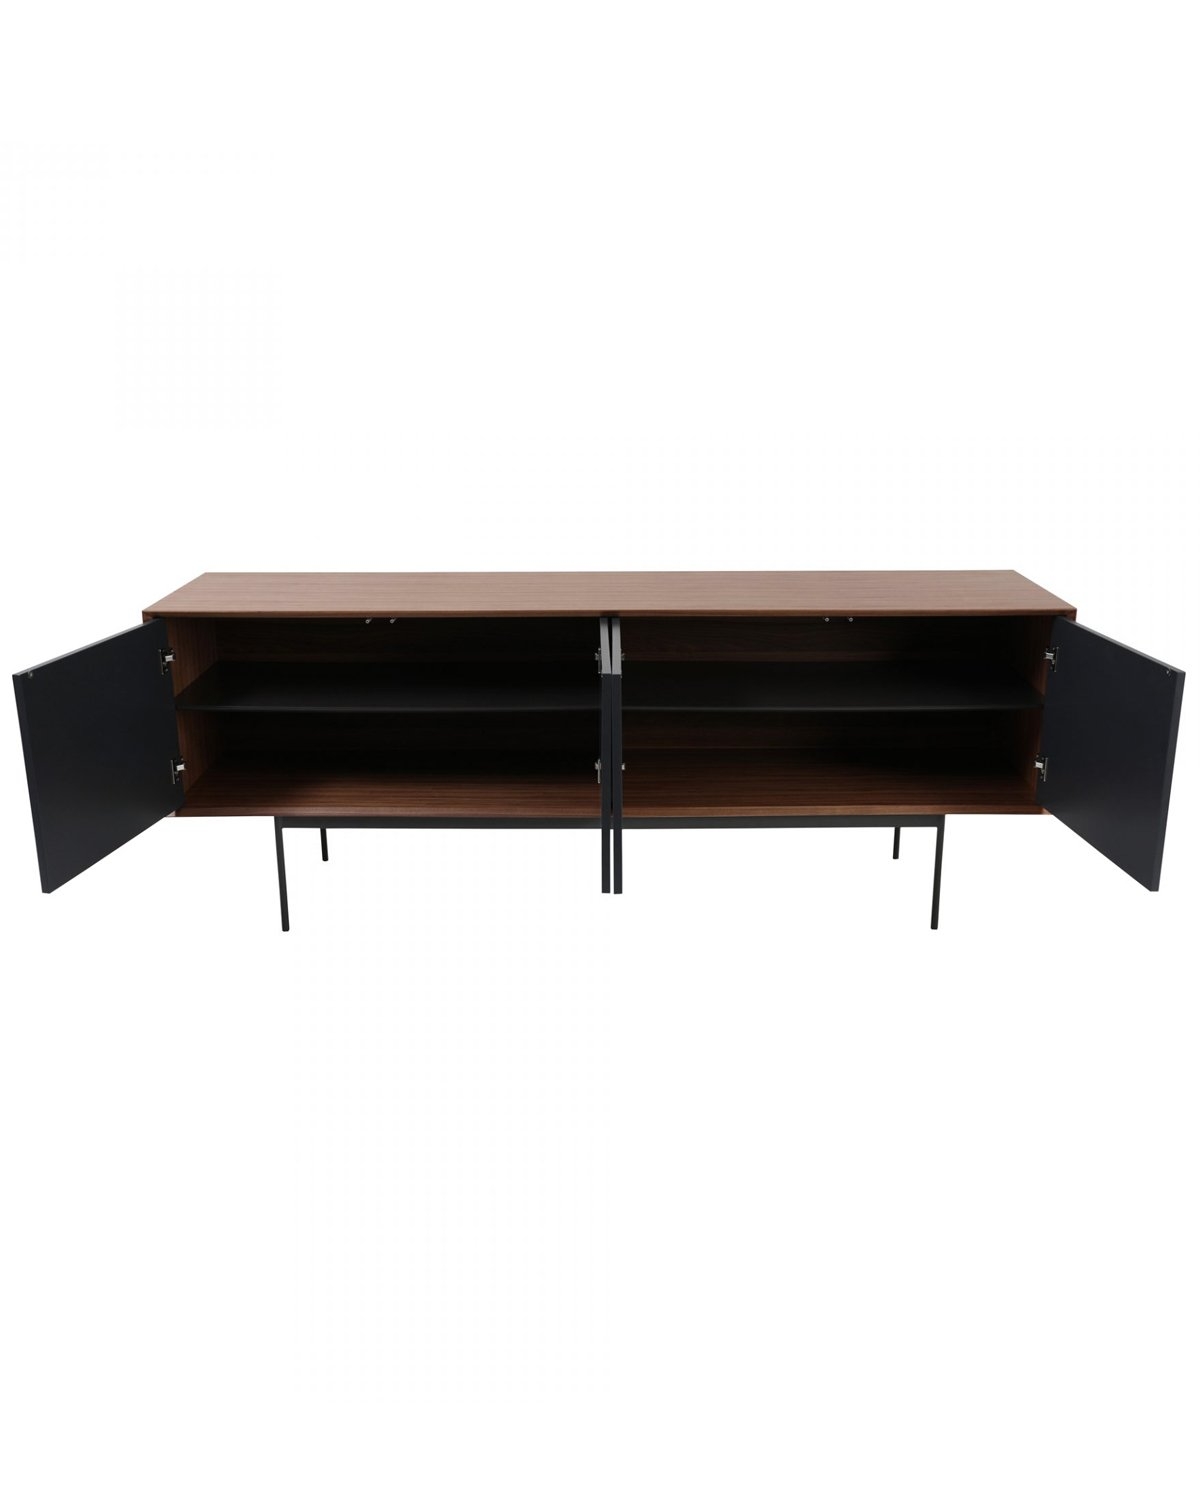 ANDREW SIDEBOARD - Image 1